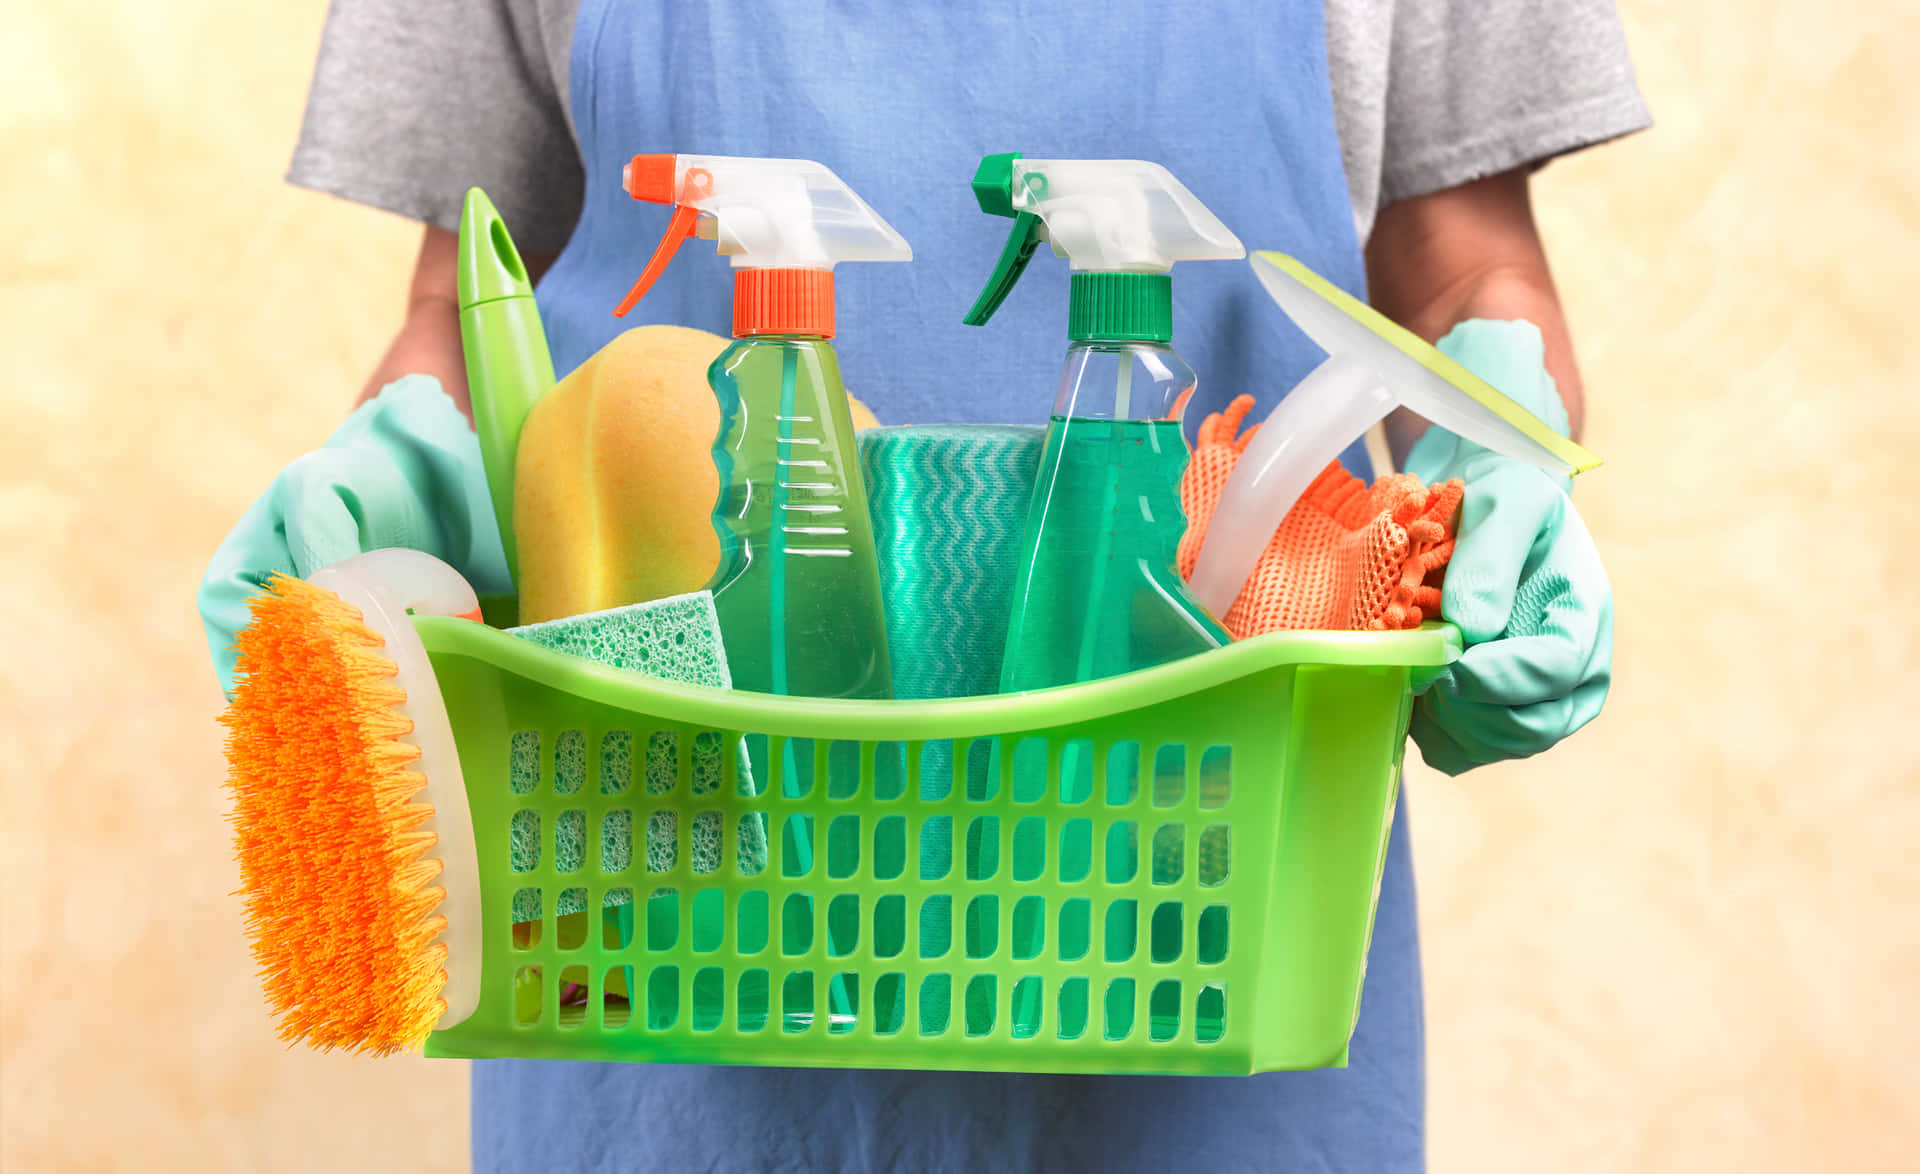 A Man Holding A Basket Of Cleaning Supplies